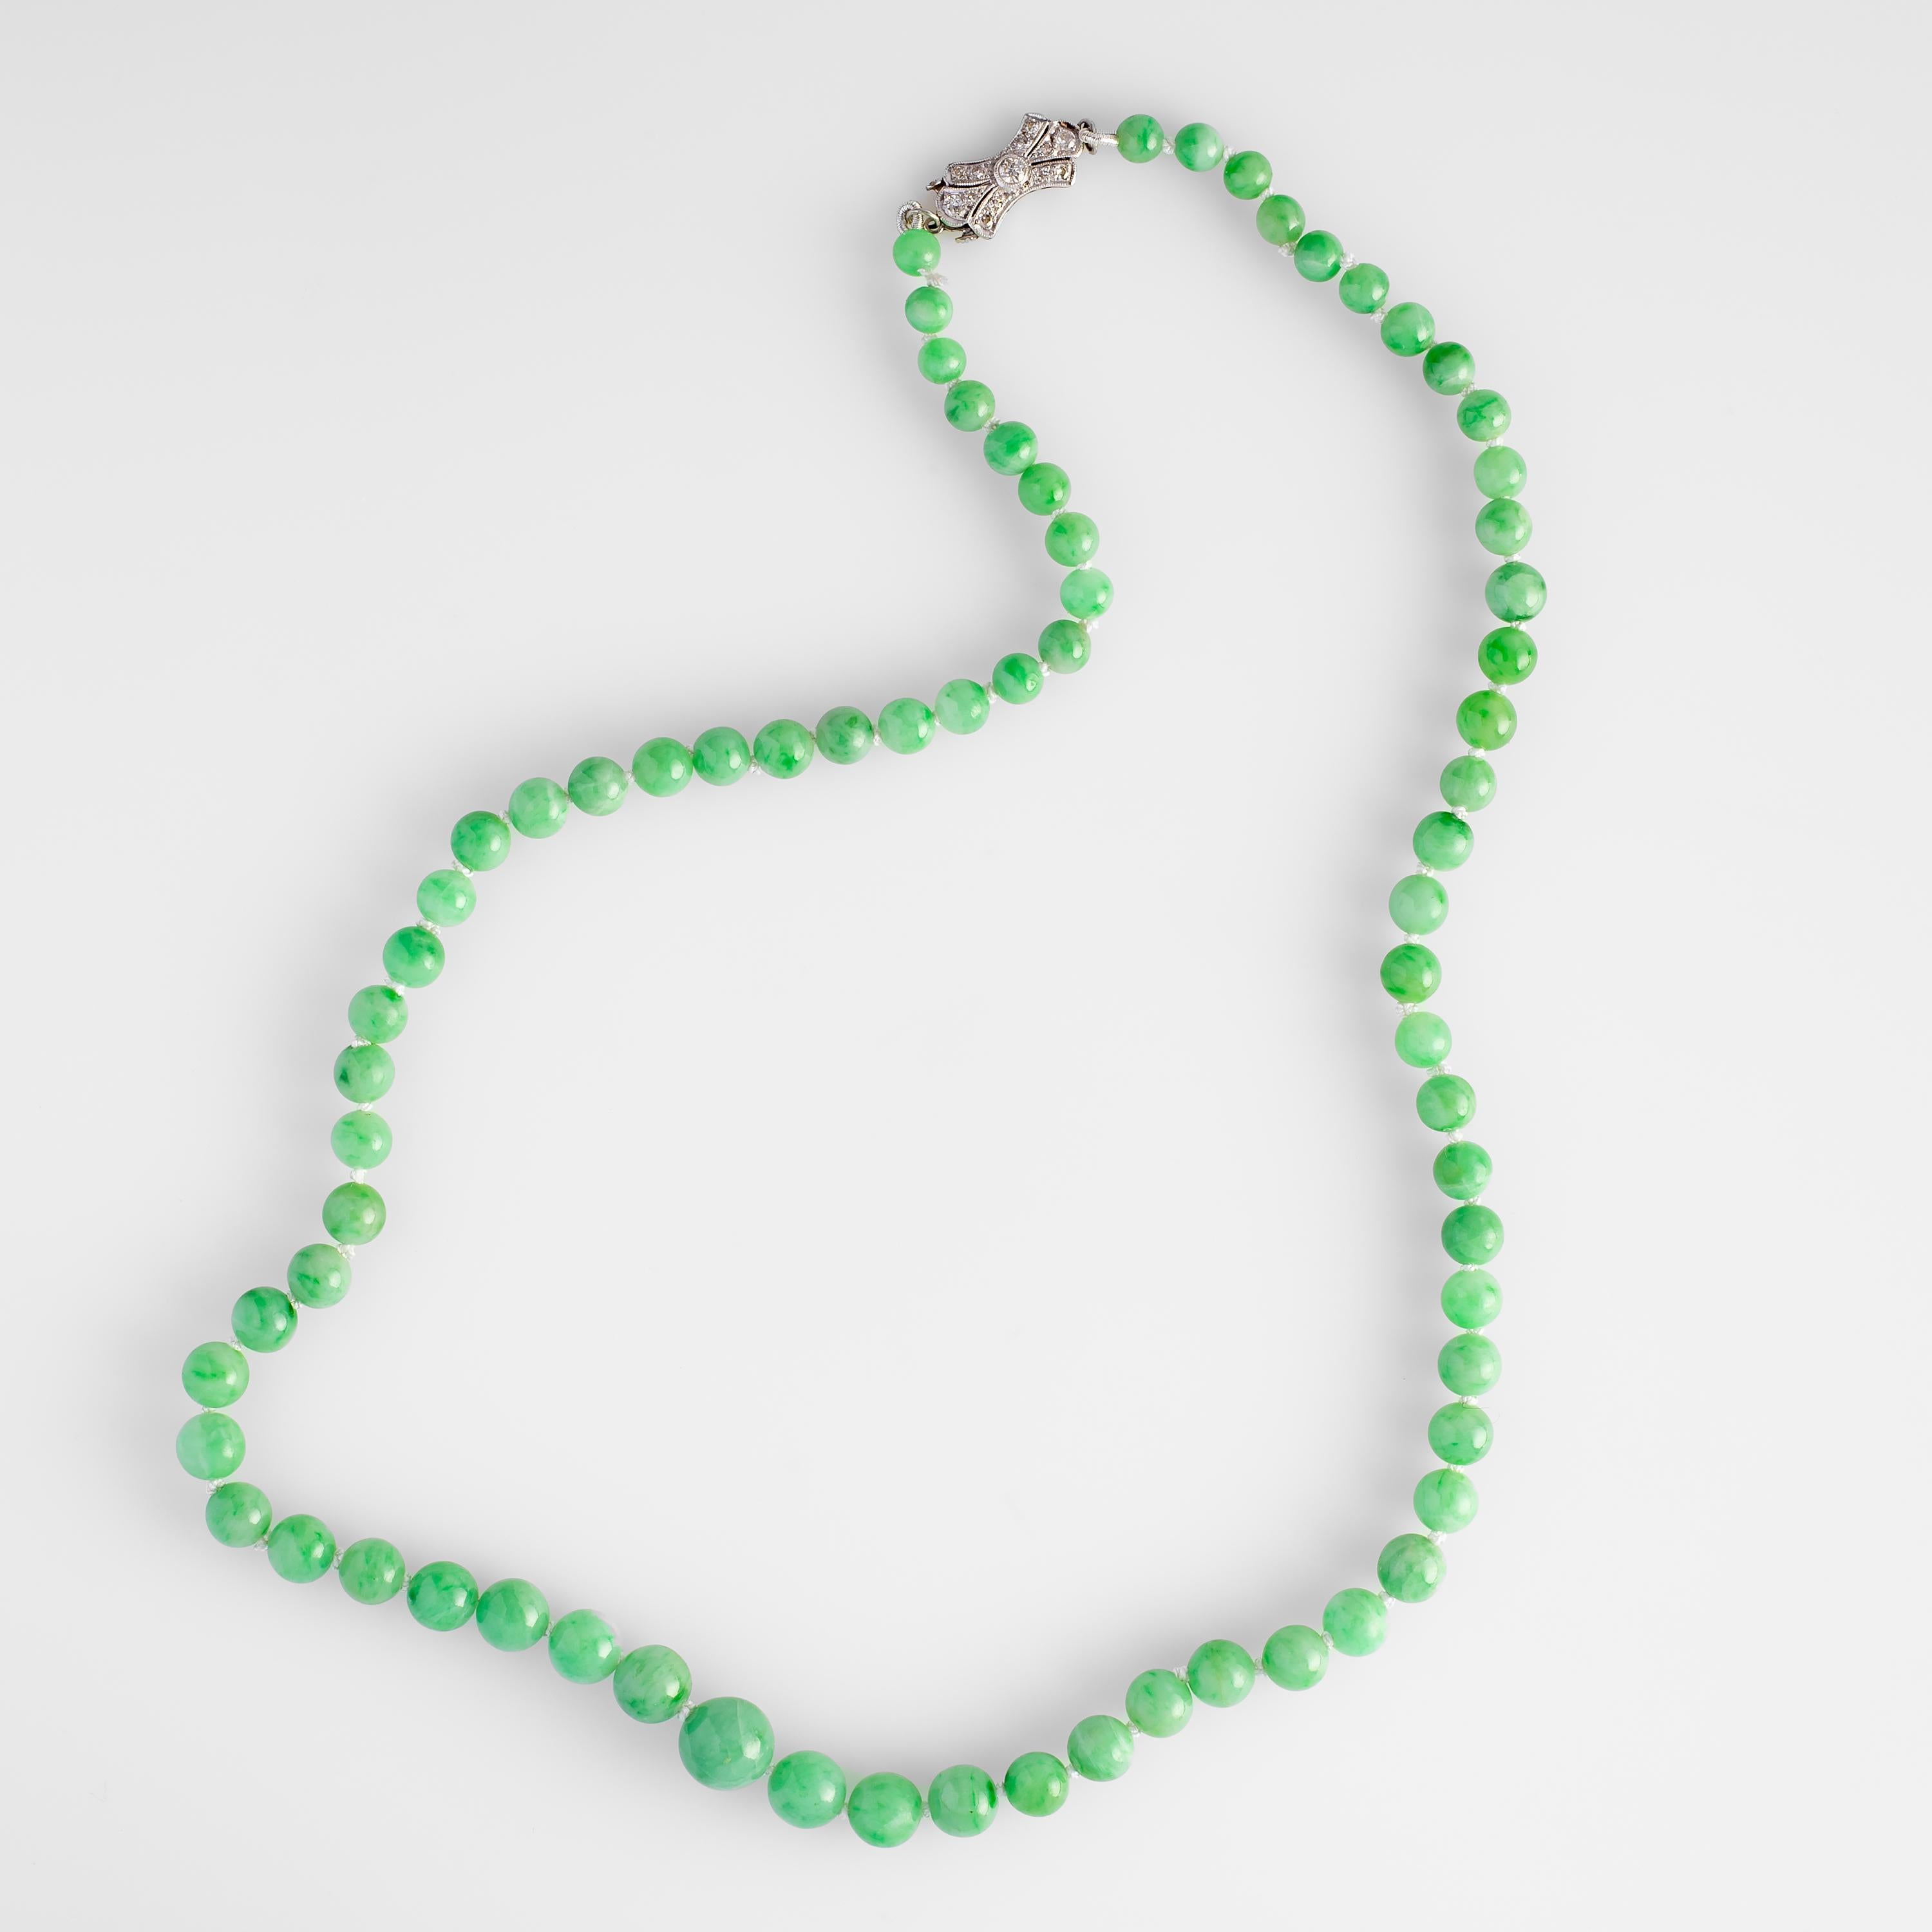 This lively necklace is composed of 73 light apple-green natural and untreated jadeite jade beads. The hand-carved and polished beads graduate in size from 5.11mm near the clasp to 10.01 at the center. This beautiful Art Deco treasure is finished